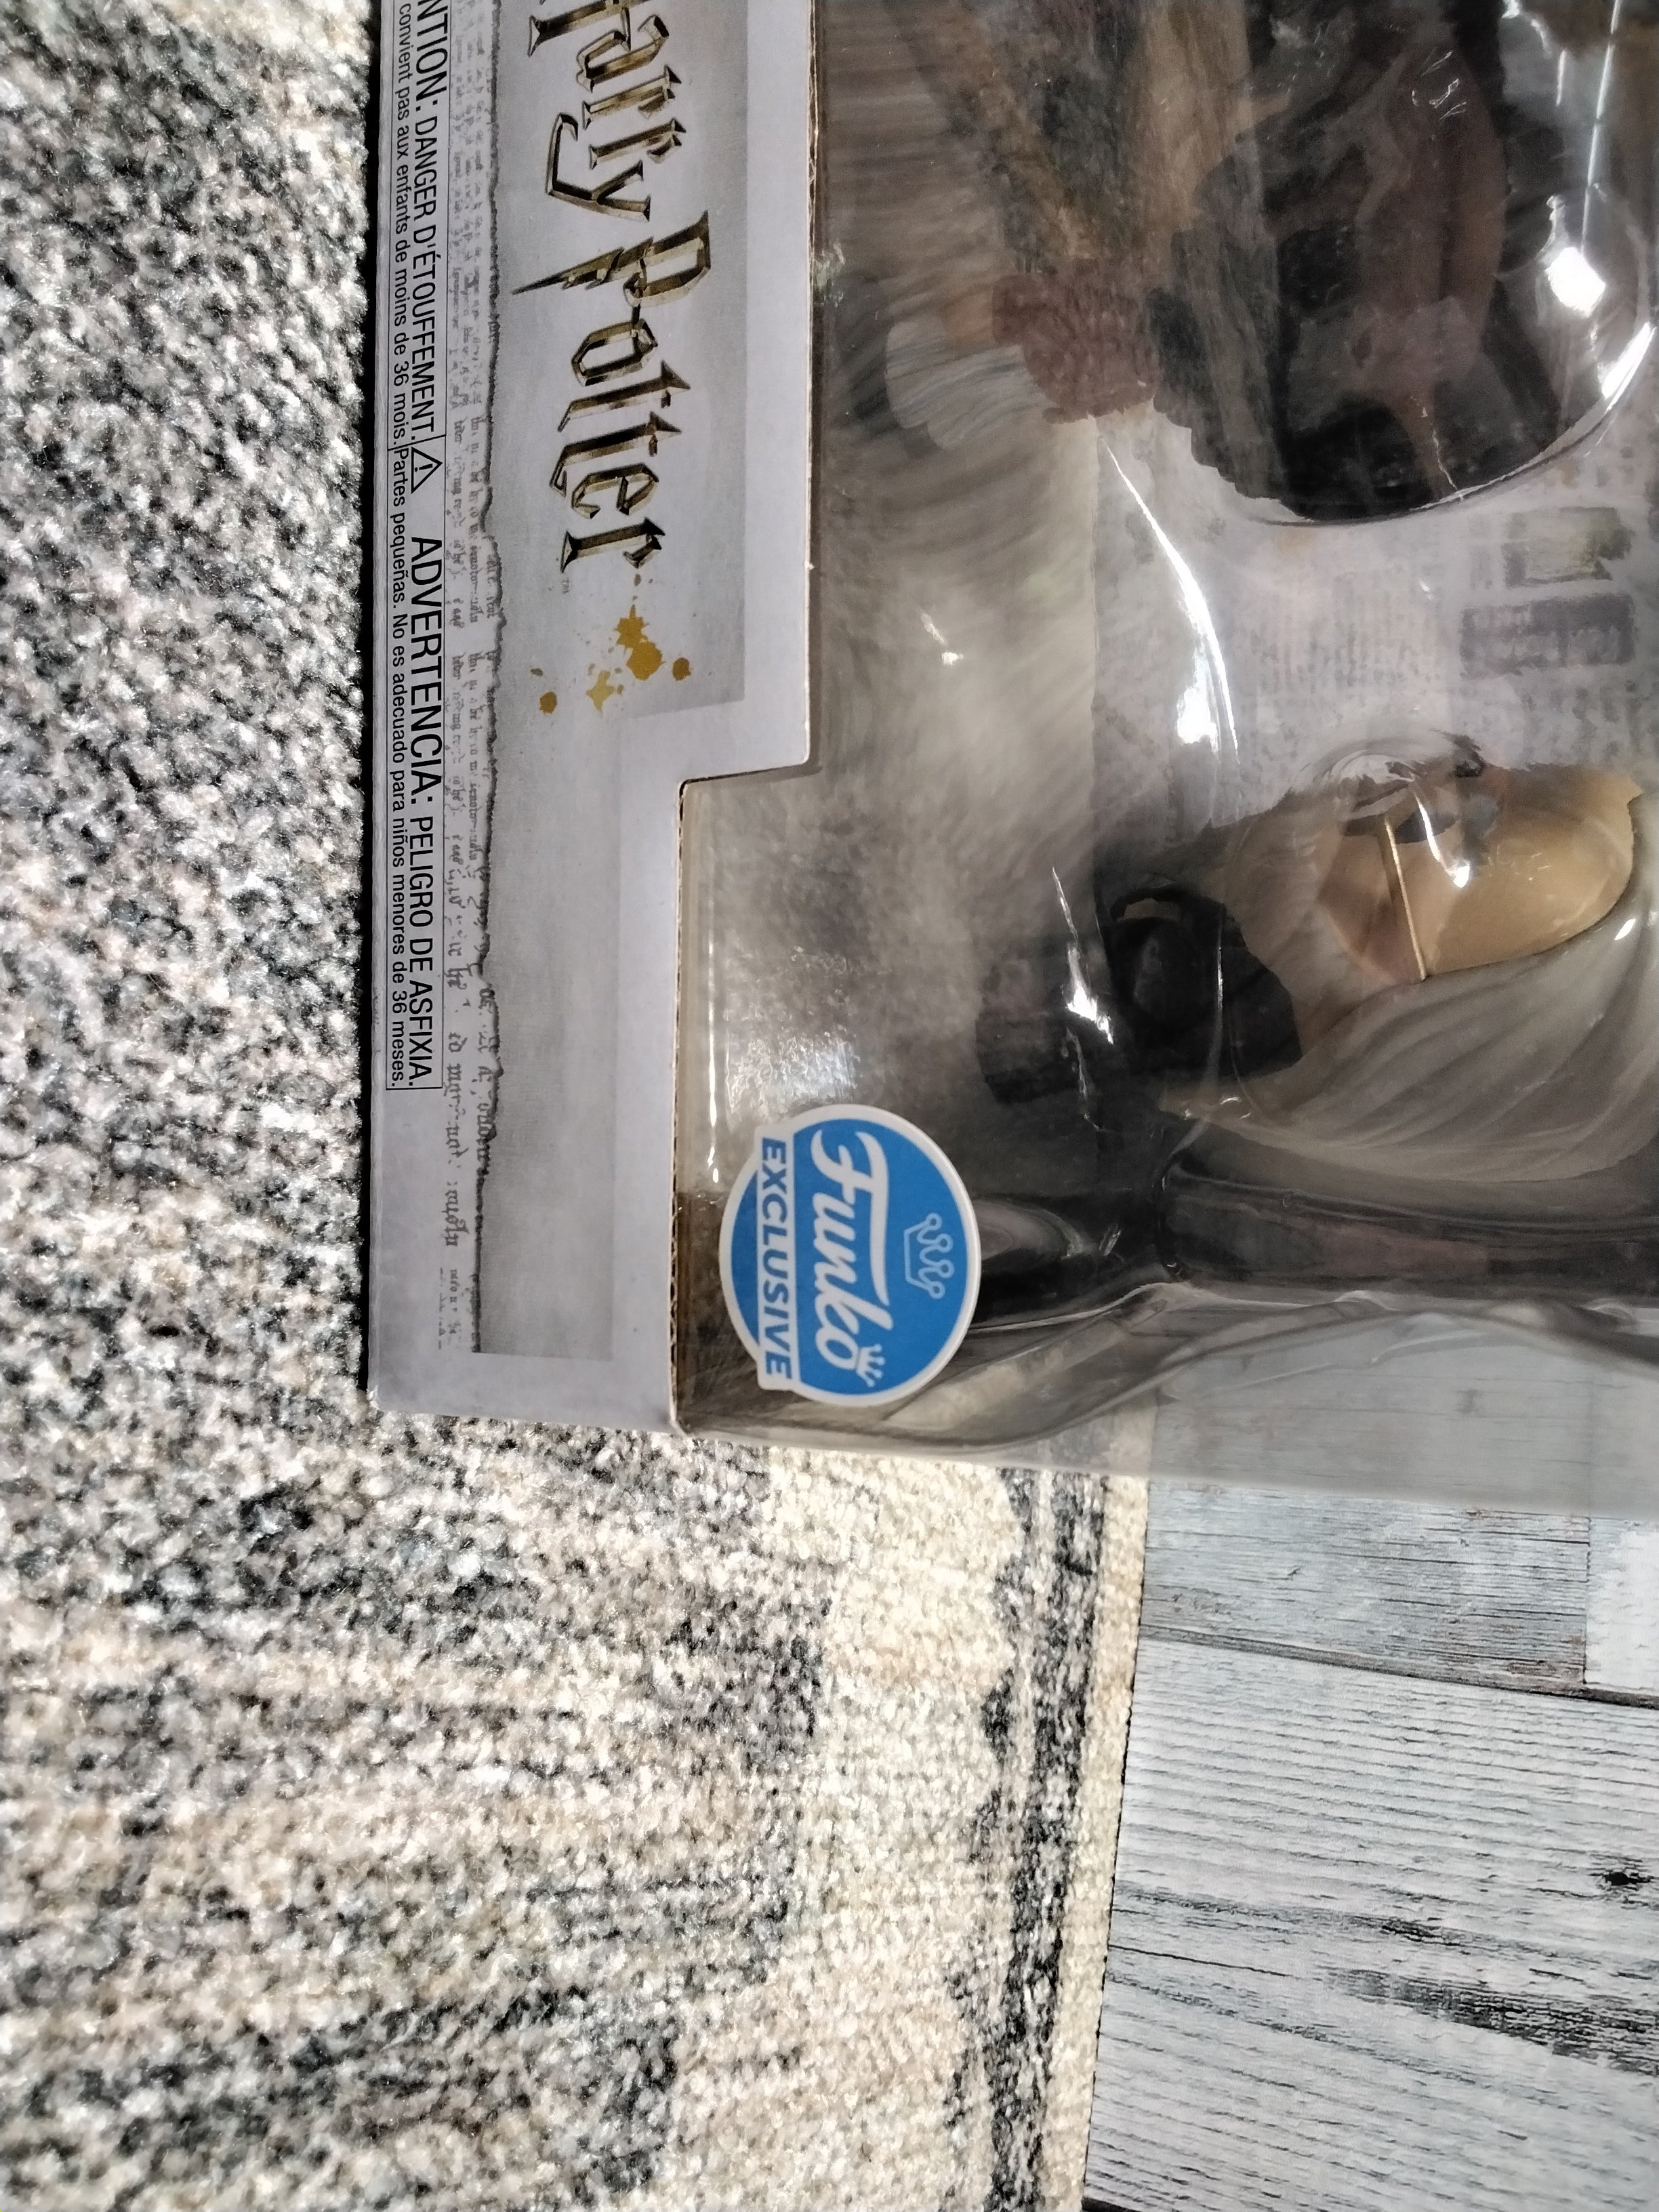 Funko POP! Moment- Harry Potter and Albus Dumbledore with The Mirror of Erised (7929612173550)